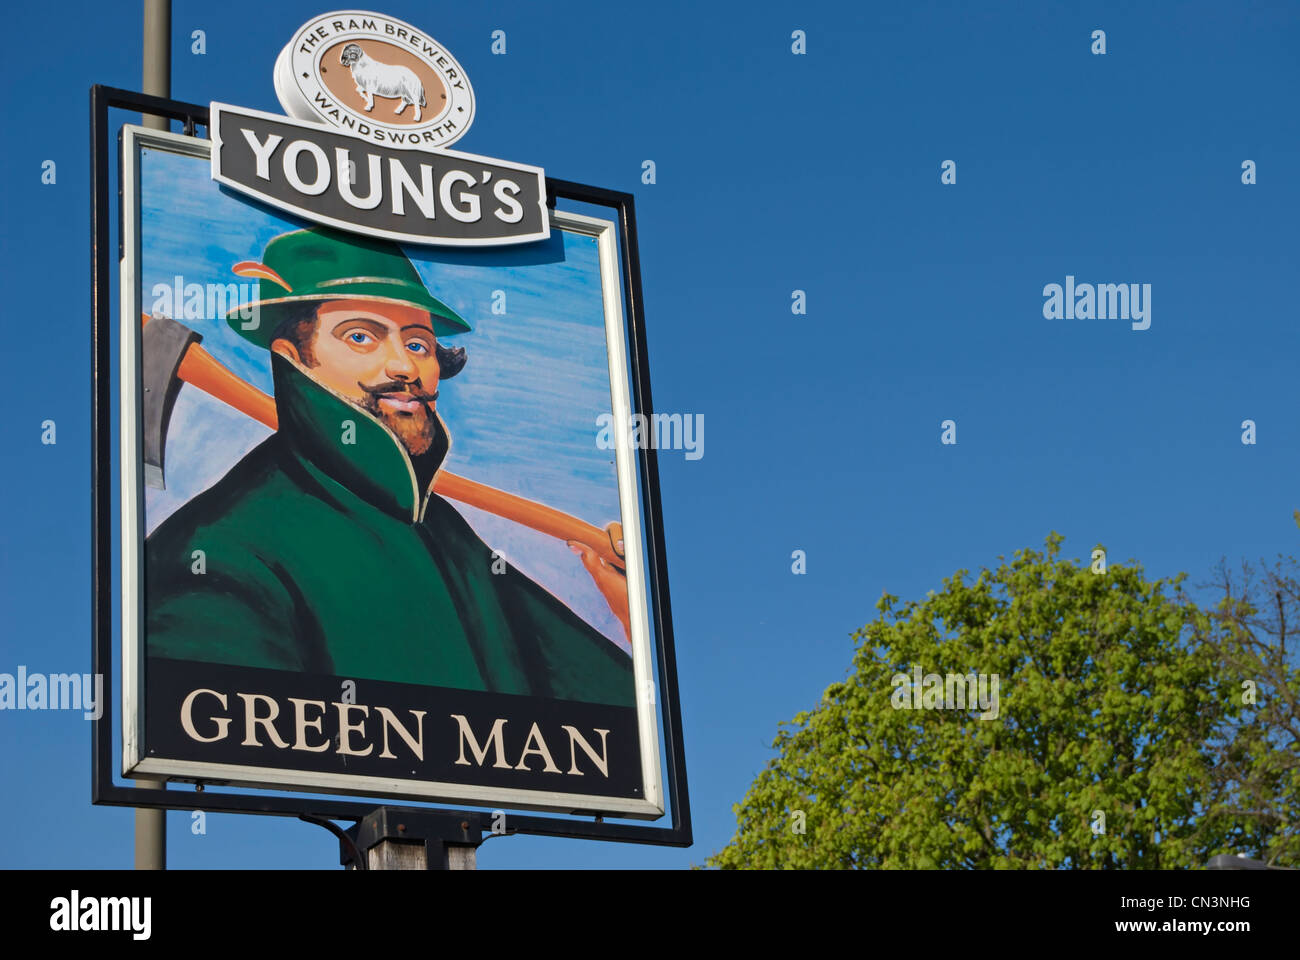 green man pub sign, with young's ram brewery logo, in putney, southwest london, england Stock Photo